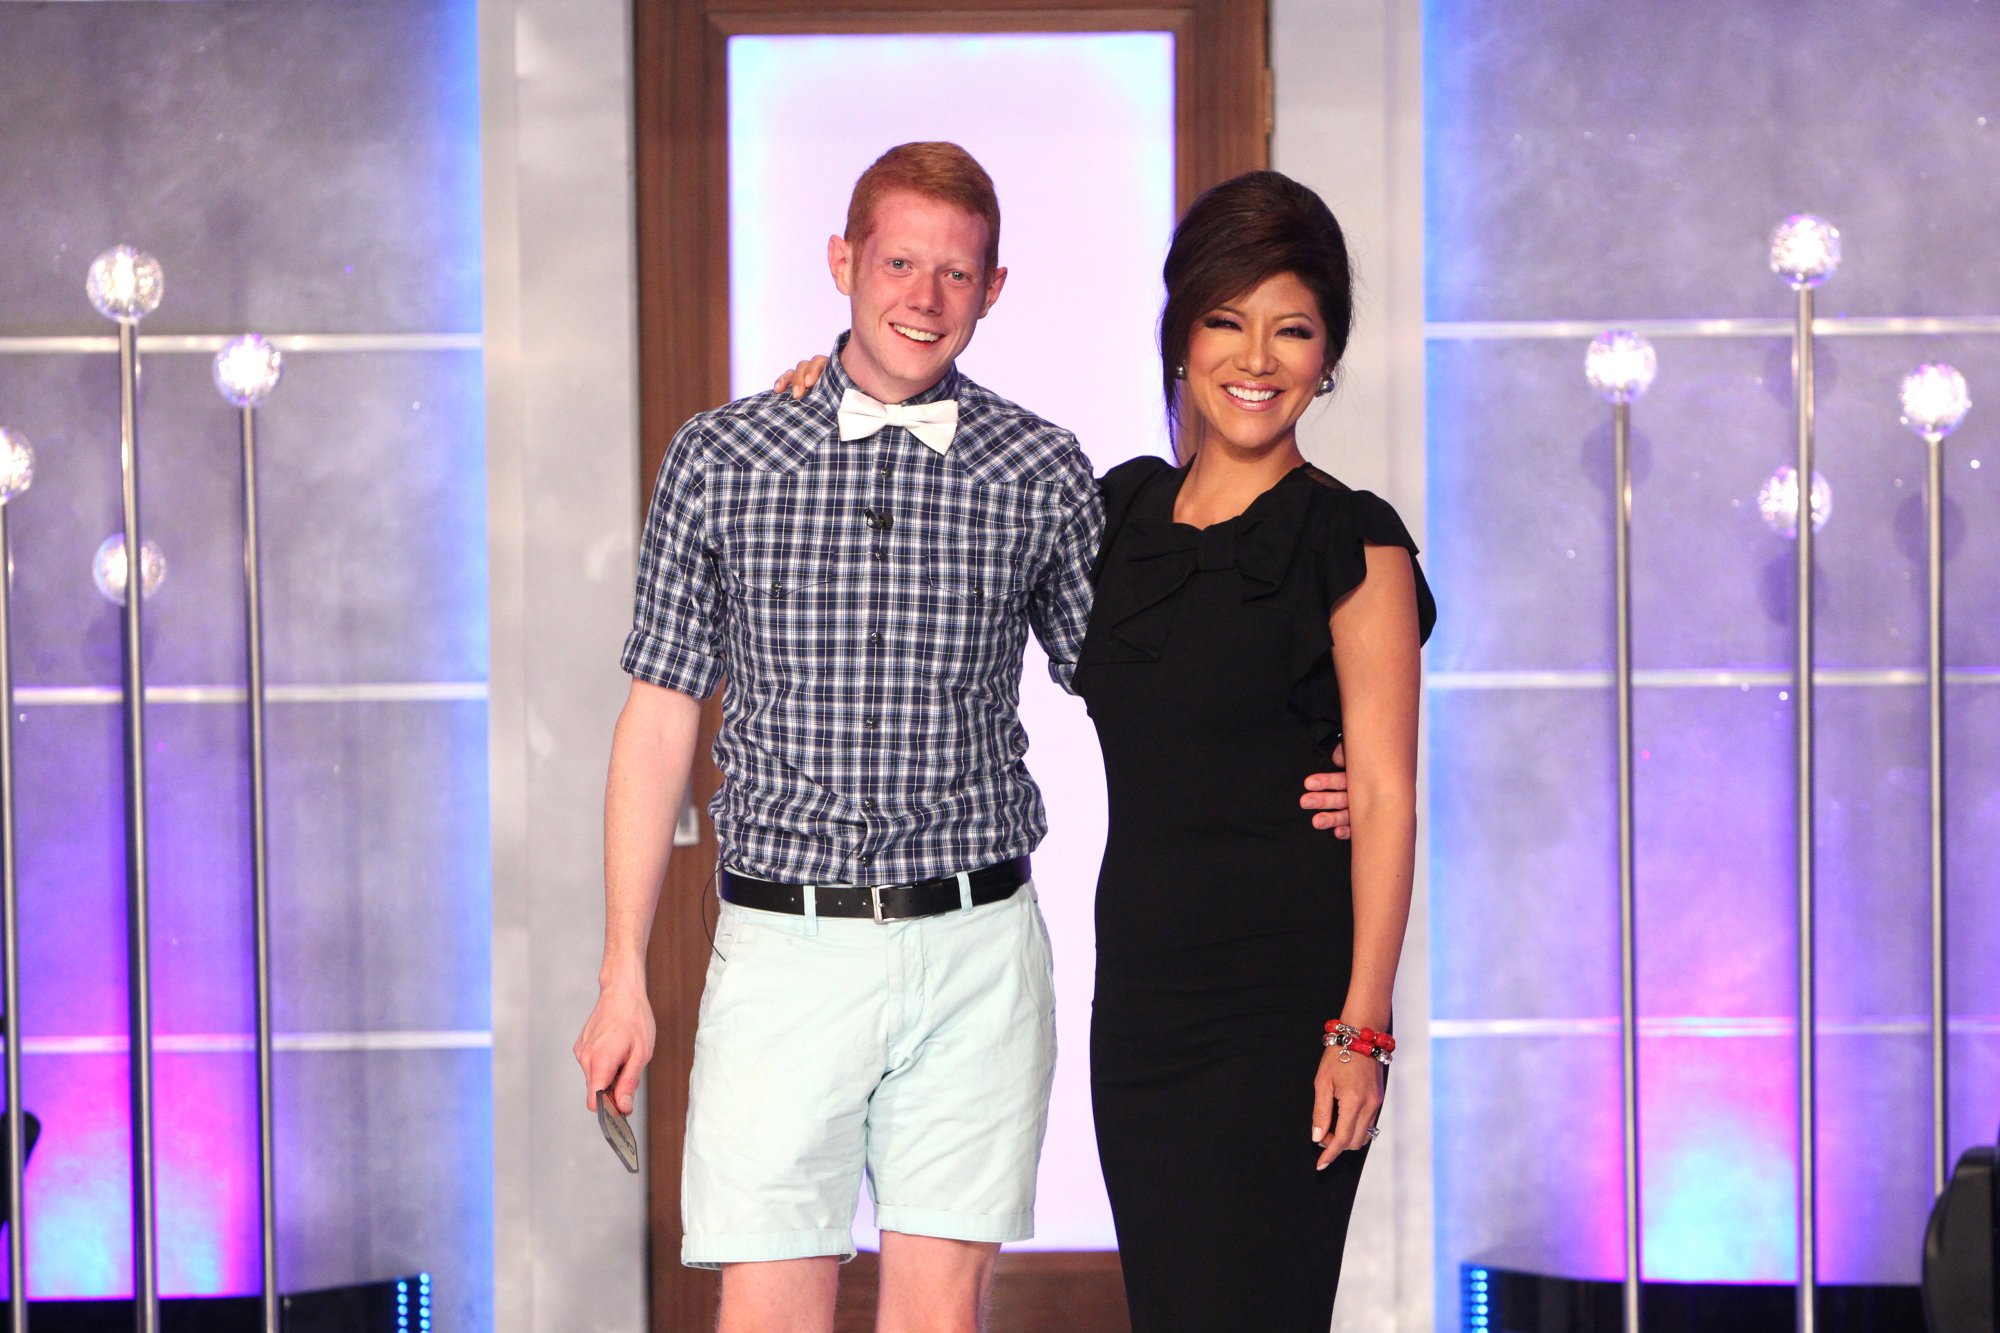 Big Brother Winner, Andy Herren and Host, Julie Chen during the Big Brother Finale